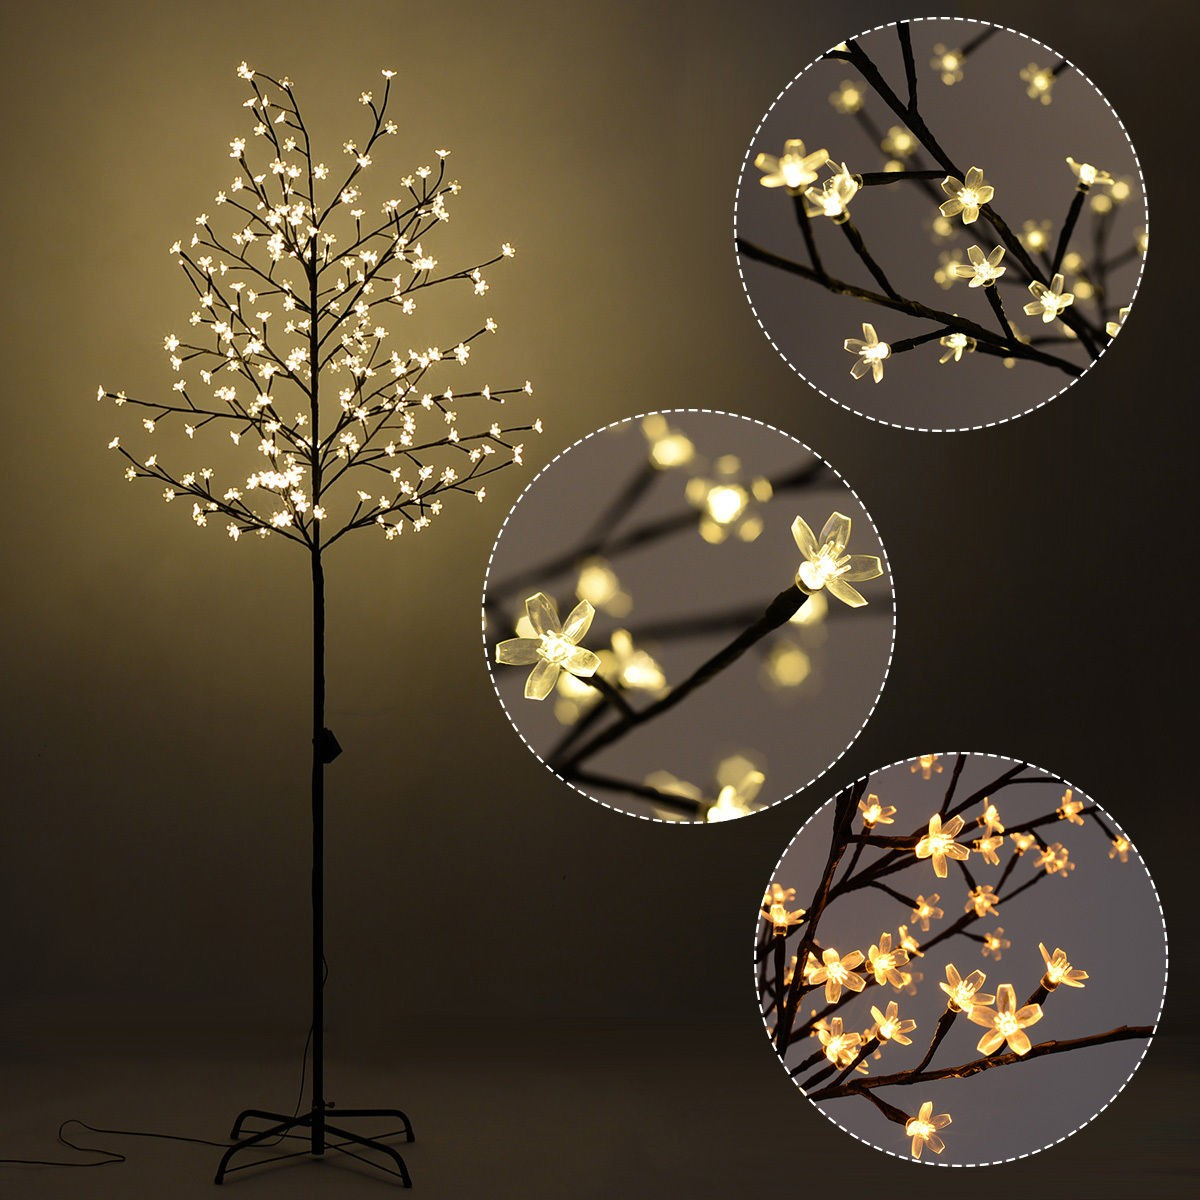 Details About New Christmas Cherry Blossom Led Tree Light Floor Lamp Holiday Decor Warm White in dimensions 1200 X 1200